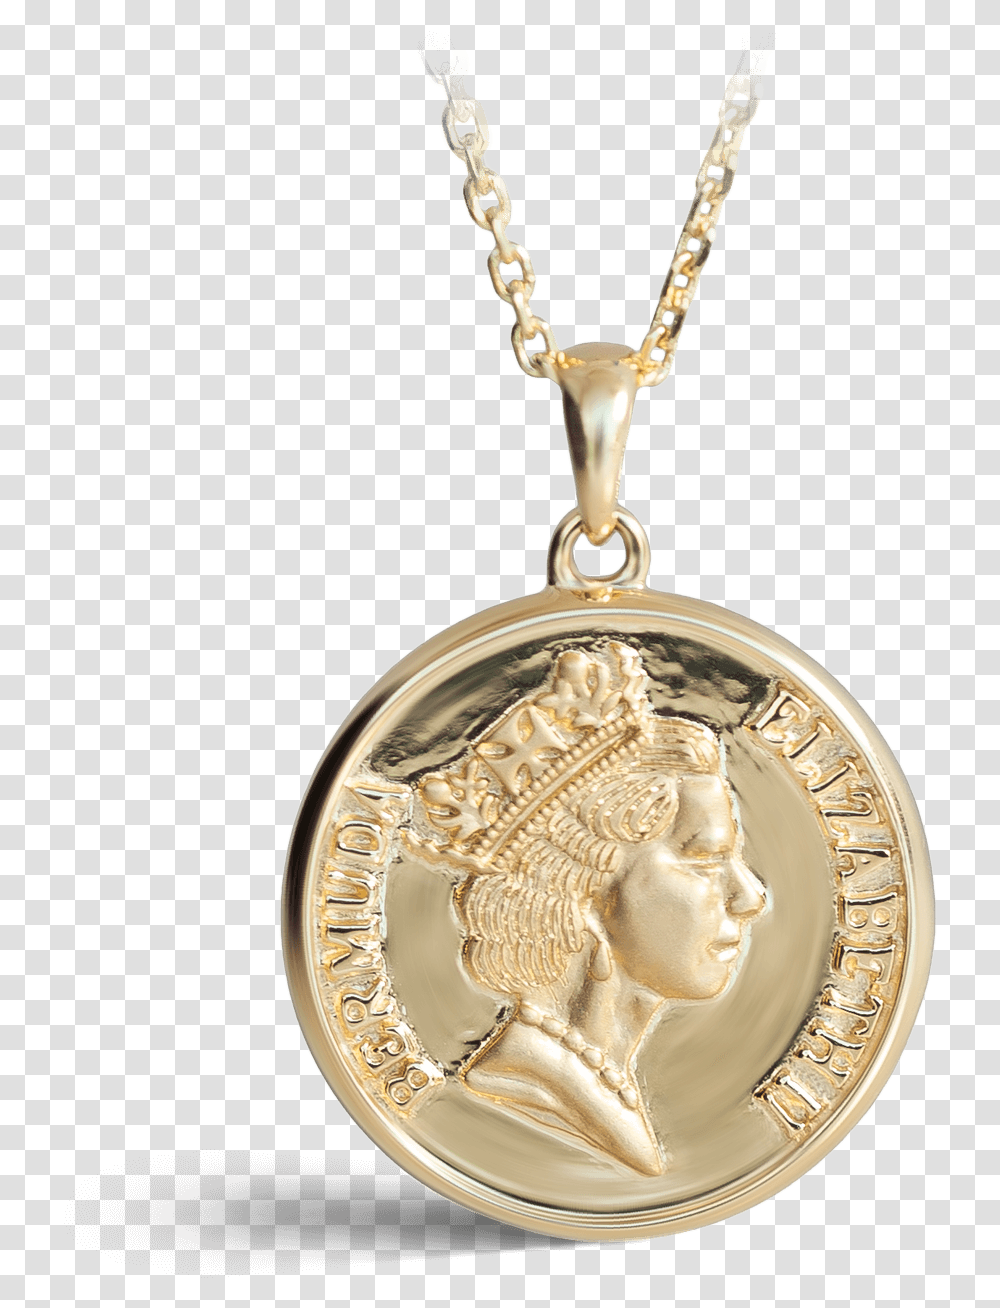 Bermuda Yellow Gold Coin Pendant Coin Pendant, Locket, Jewelry, Accessories, Accessory Transparent Png